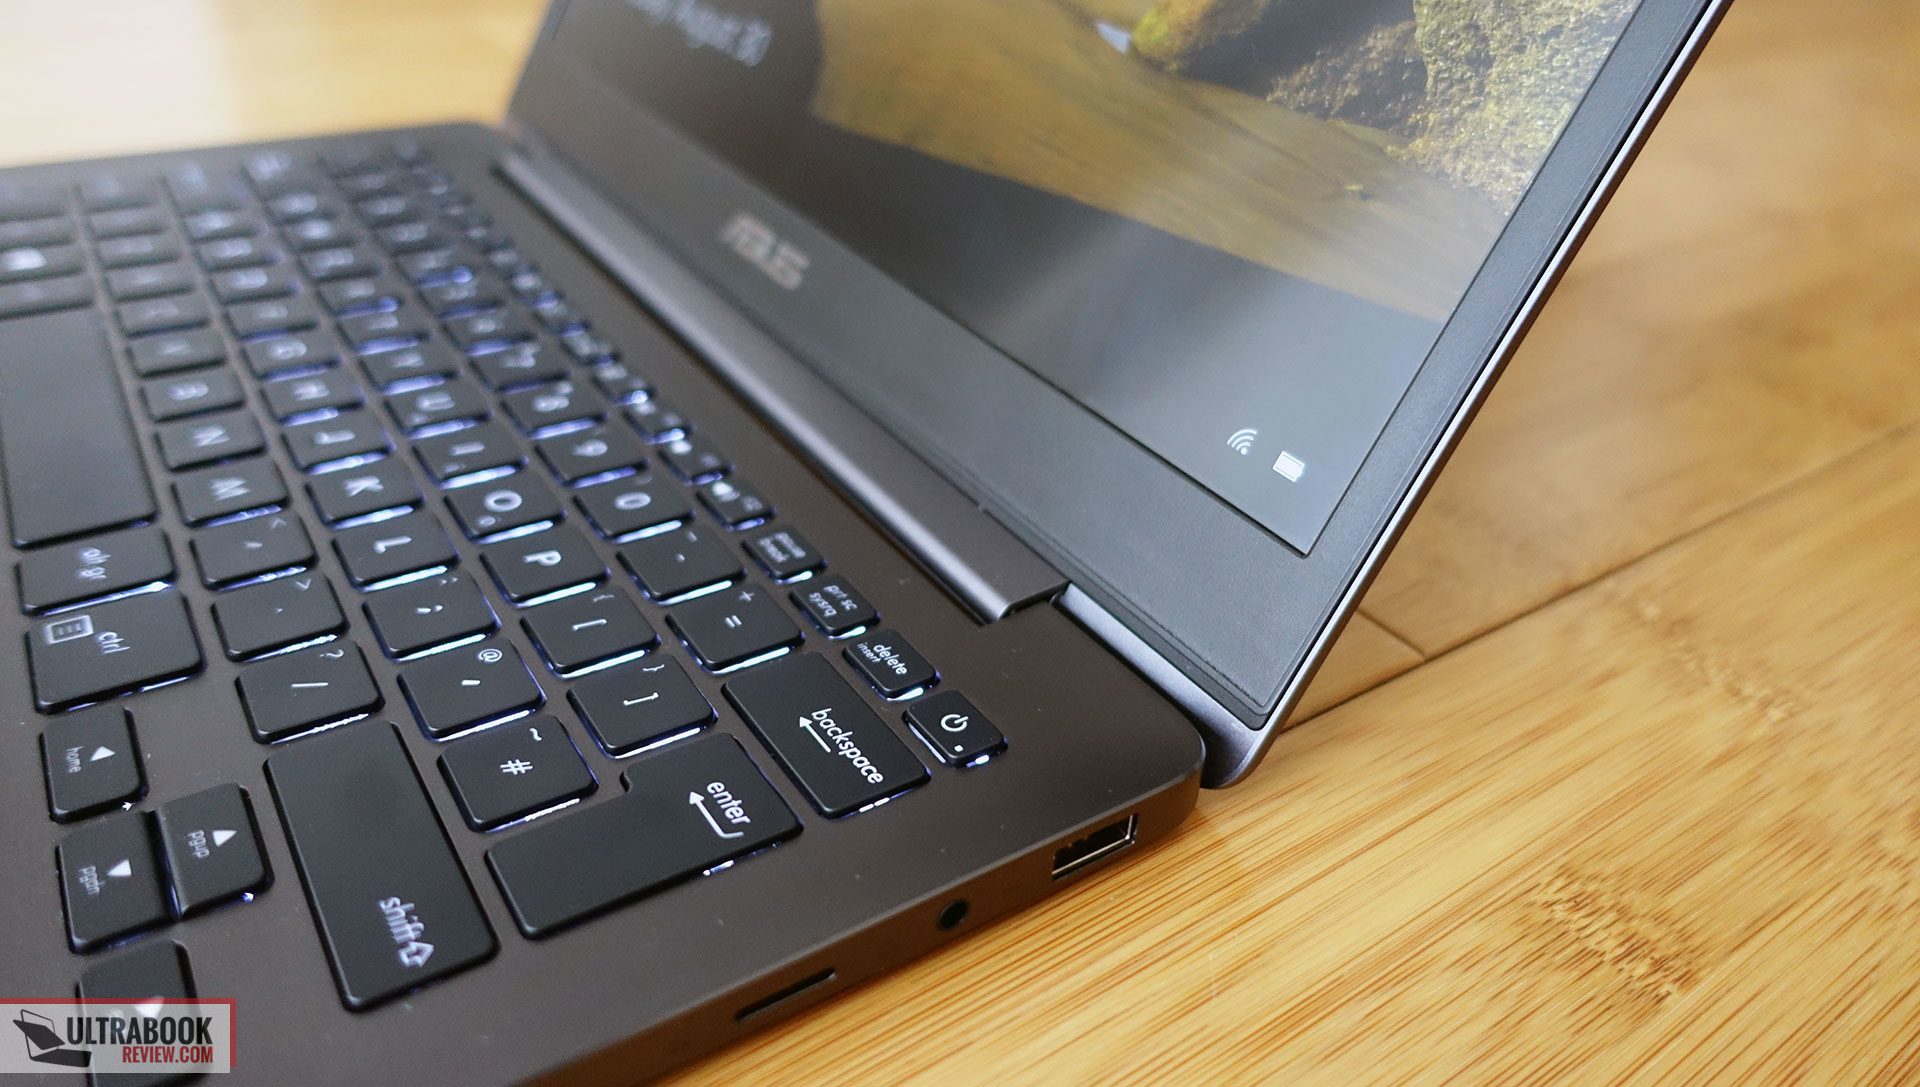 Asus ZenBook 13 UX331UA review: A thin, light, and peppy budget laptop with  battery life to spare